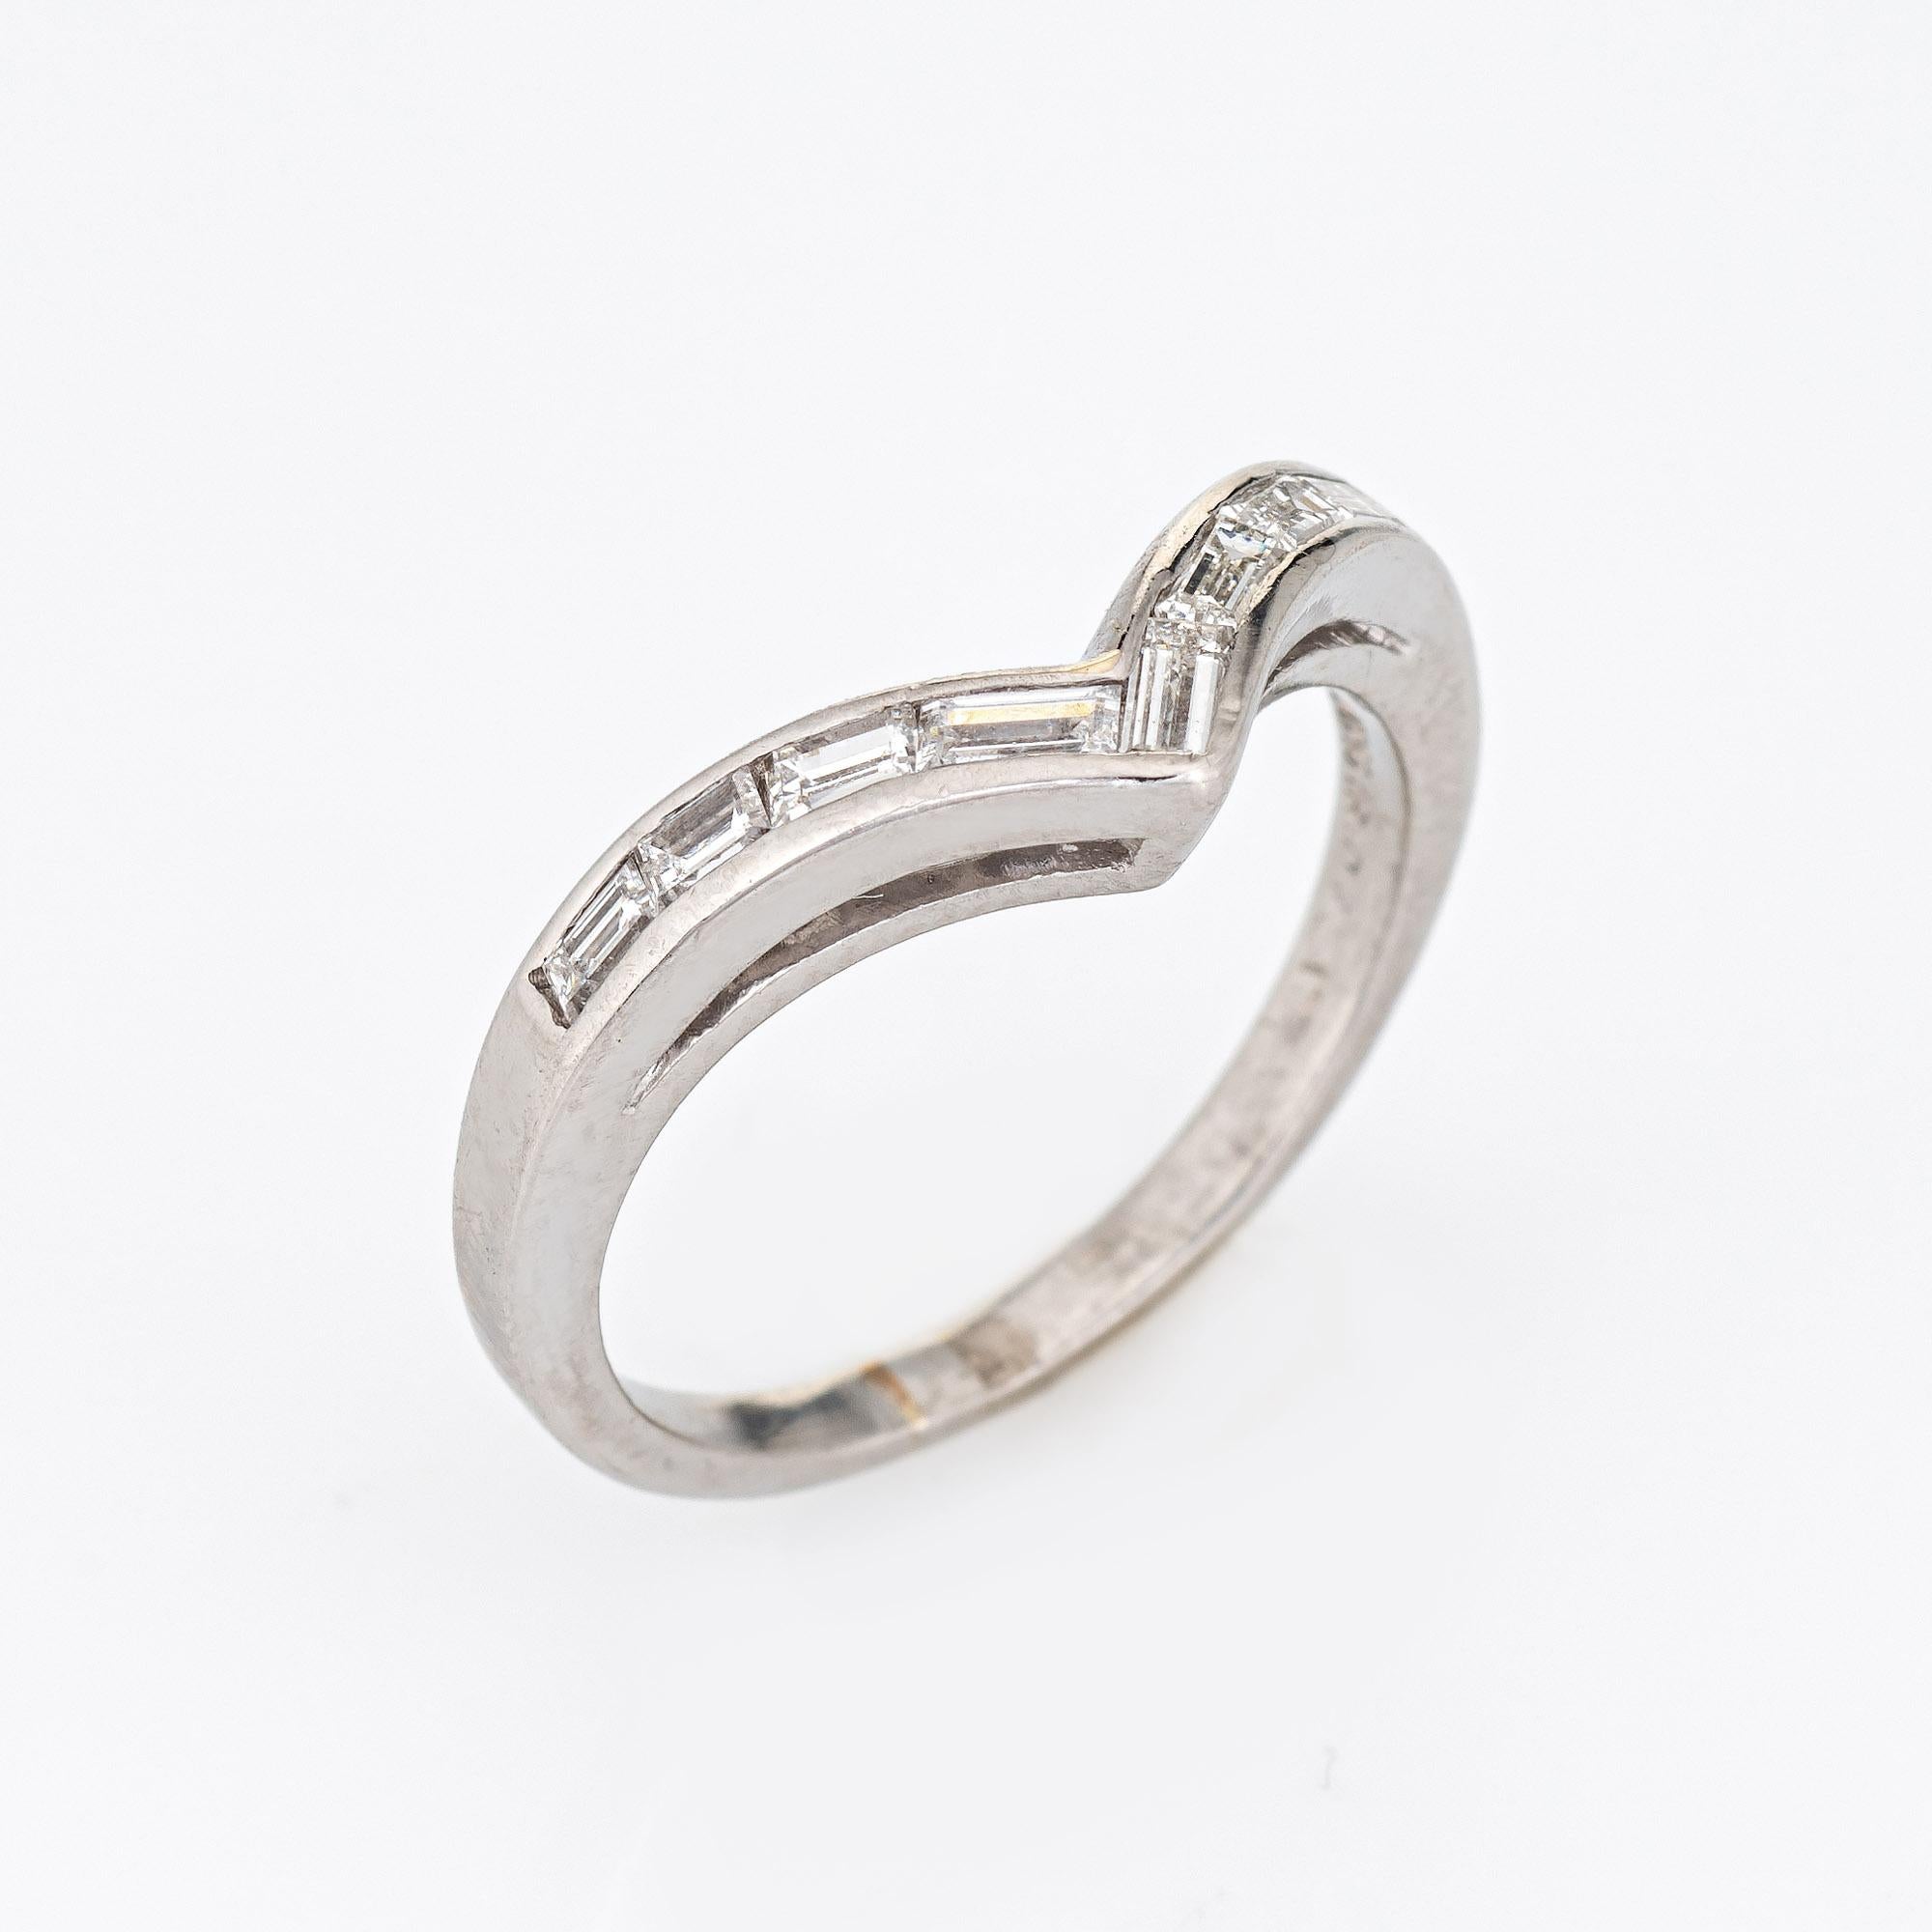 Stylish vintage diamond 'V' ring crafted in platinum (circa 1950s to 1960s). 

8 straight baguette cut diamonds total an estimated 0.40 carats (estimated at G-H color and VS2-SI1 clarity). 

Set with bright white sparkling diamonds the 'V' ring is